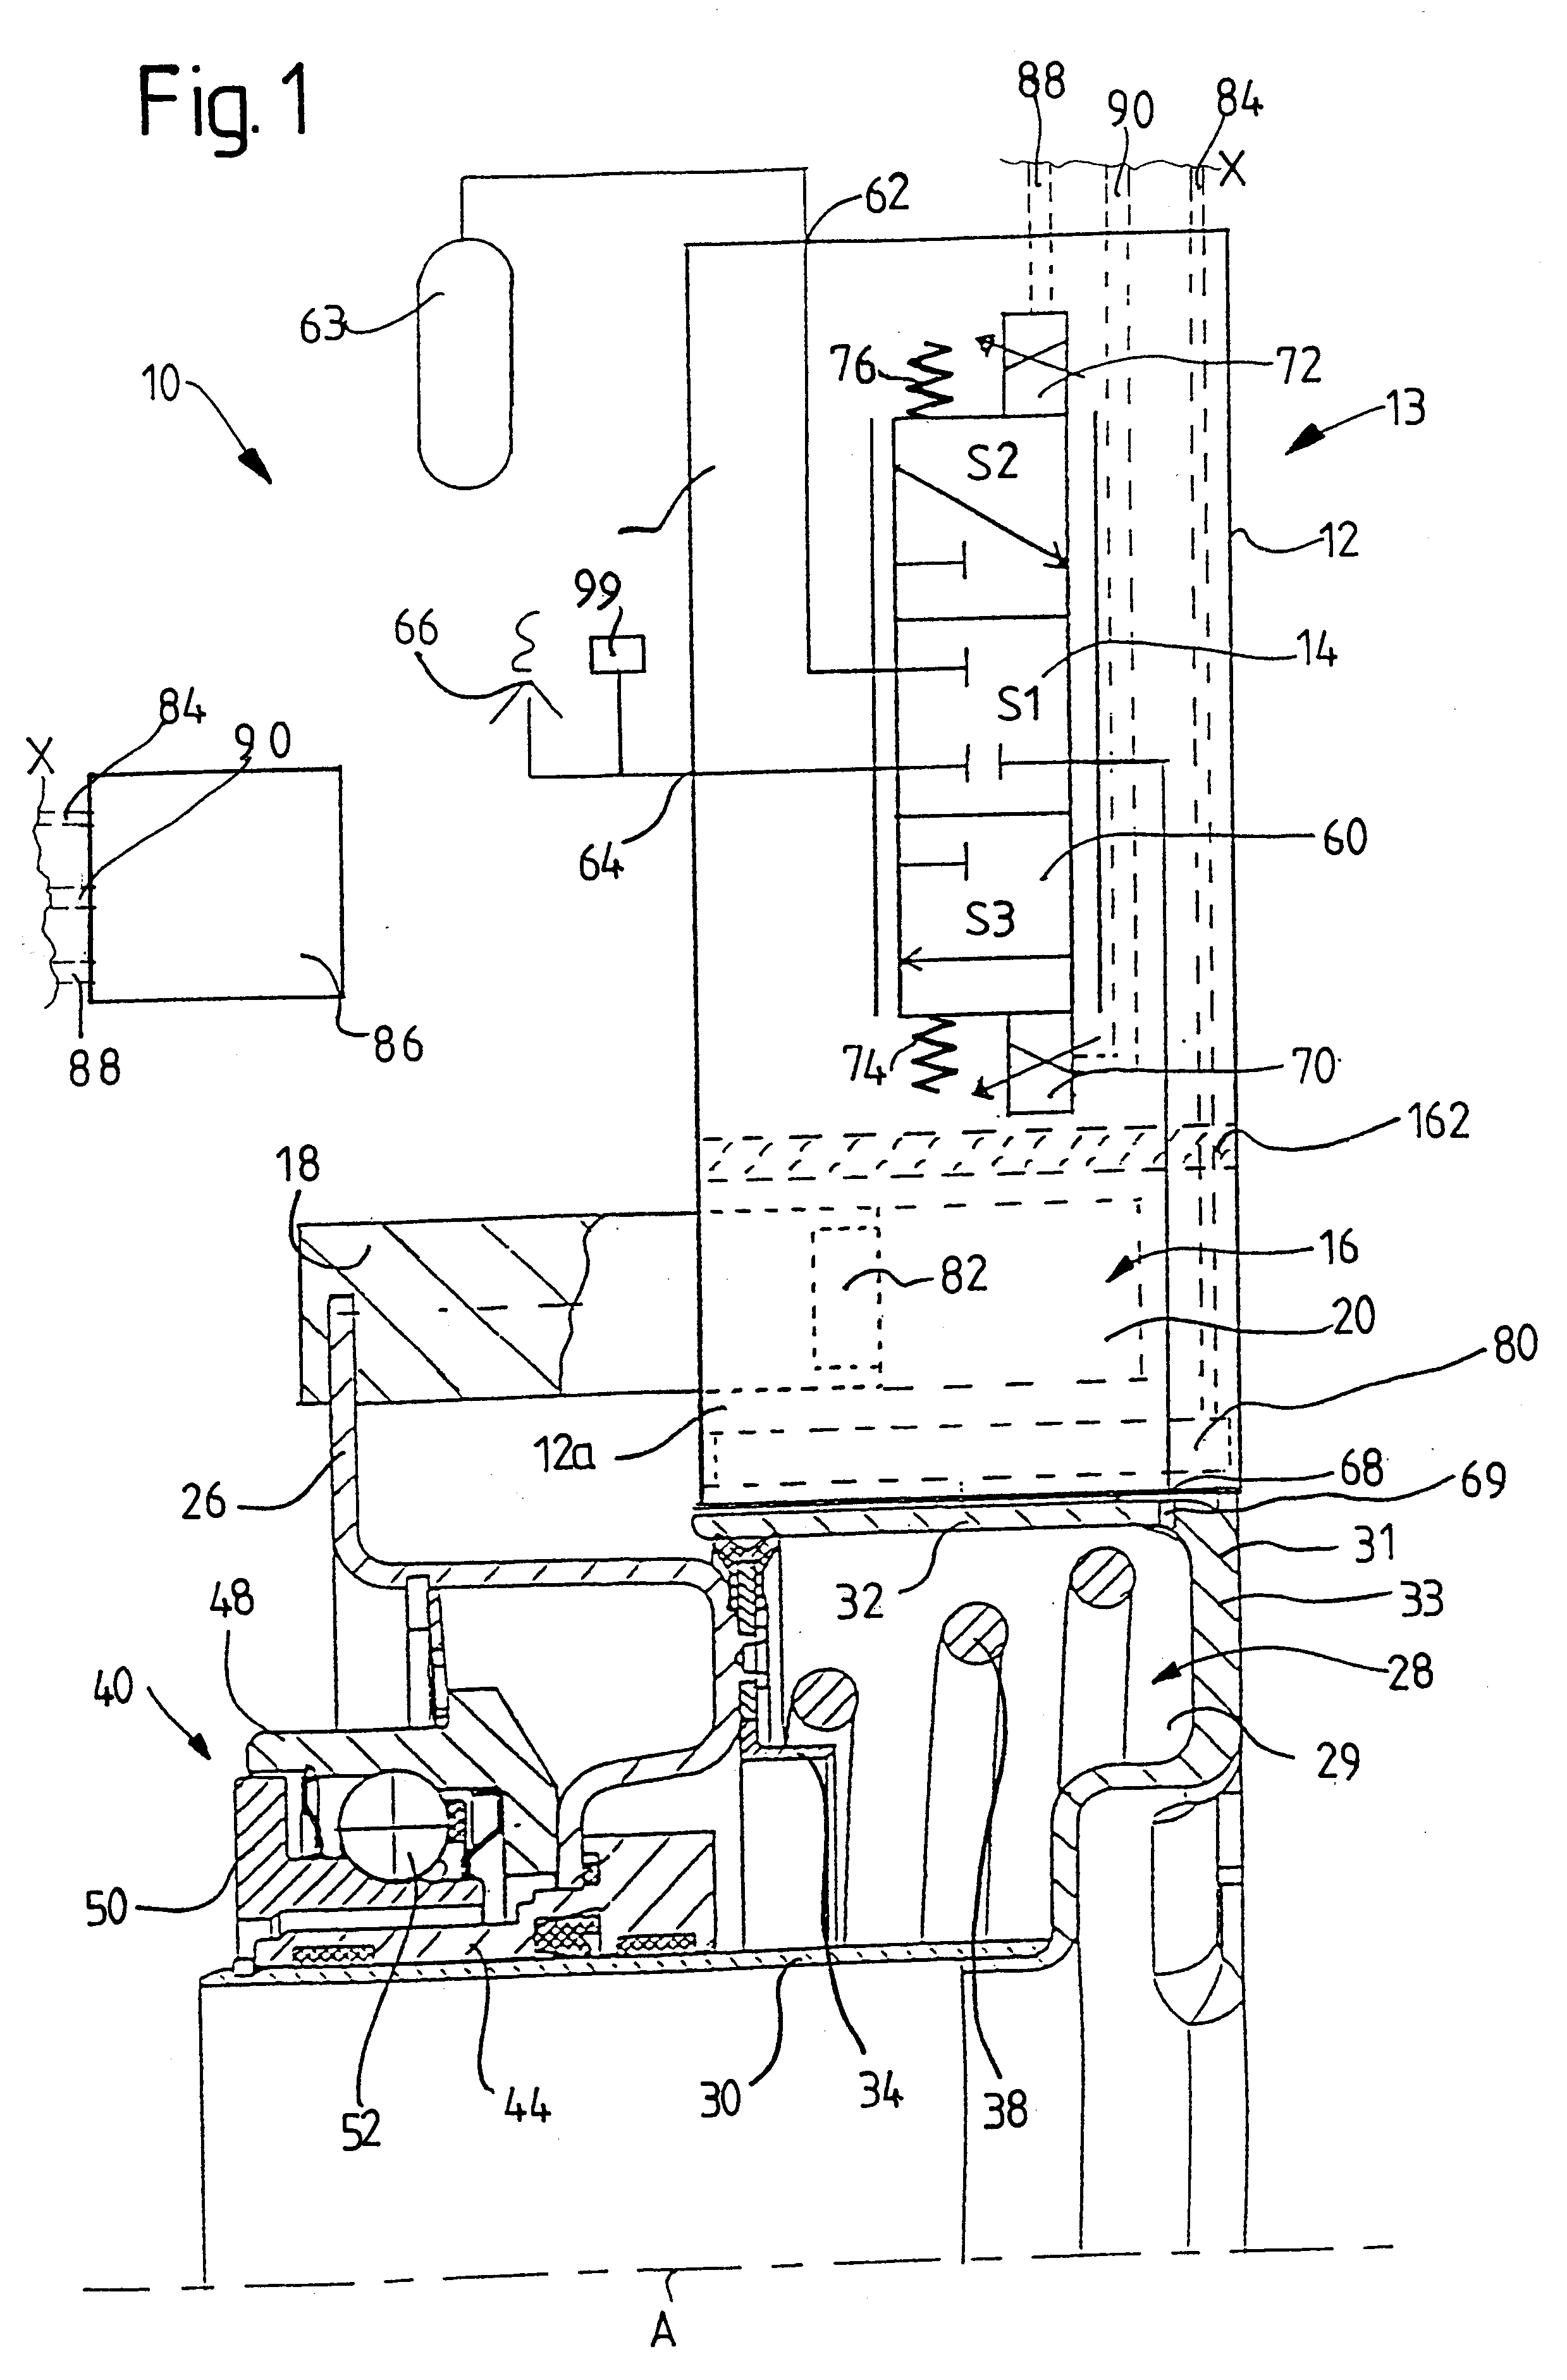 Actuation device for a friction clutch